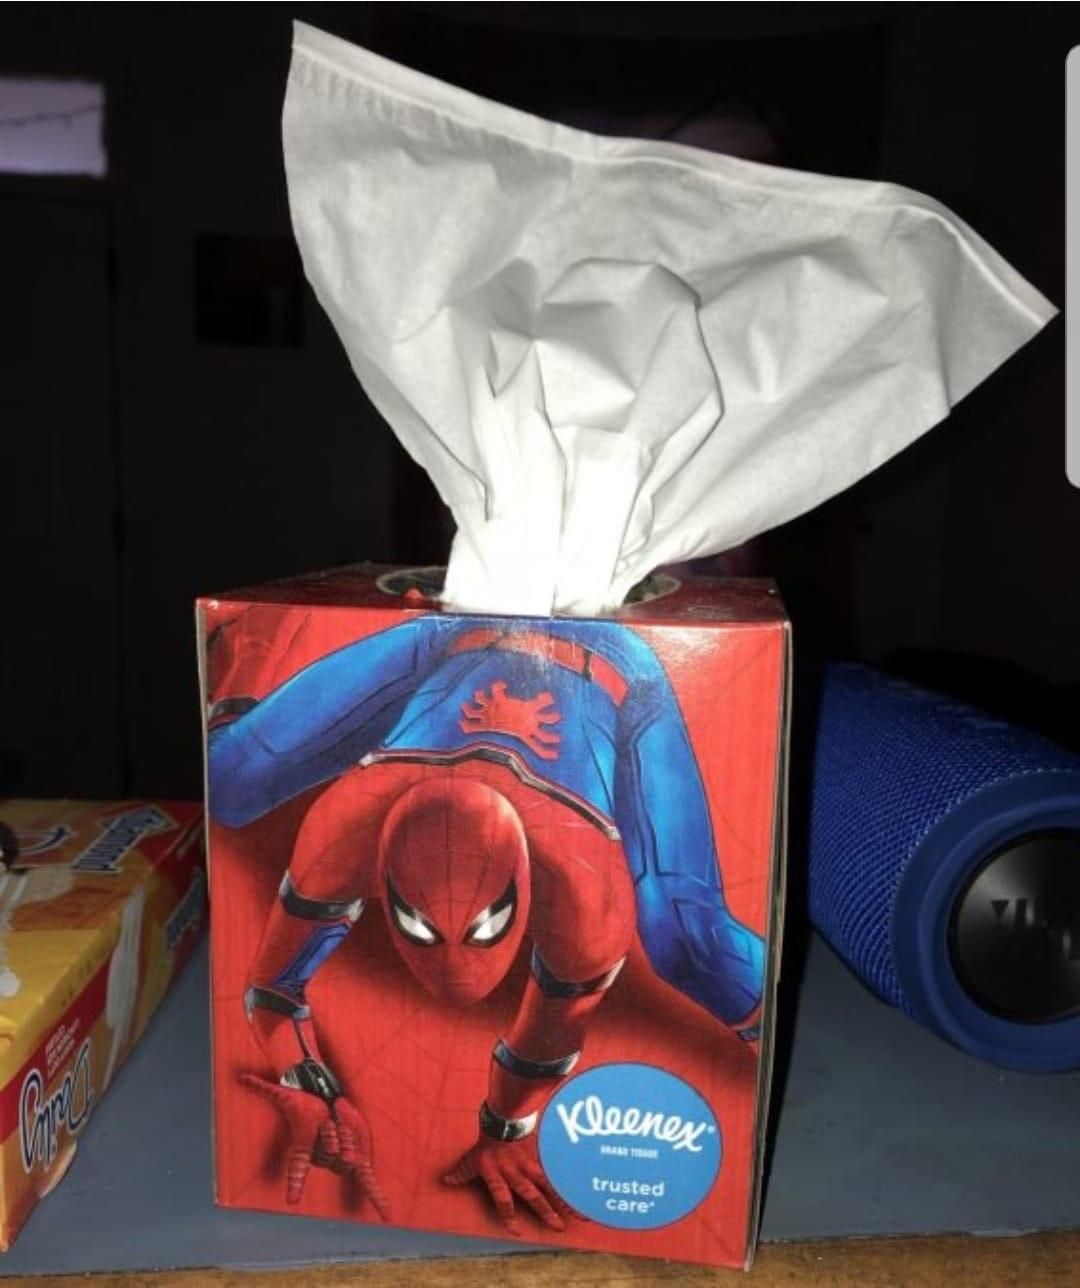 For those of us mourning Stan Lee